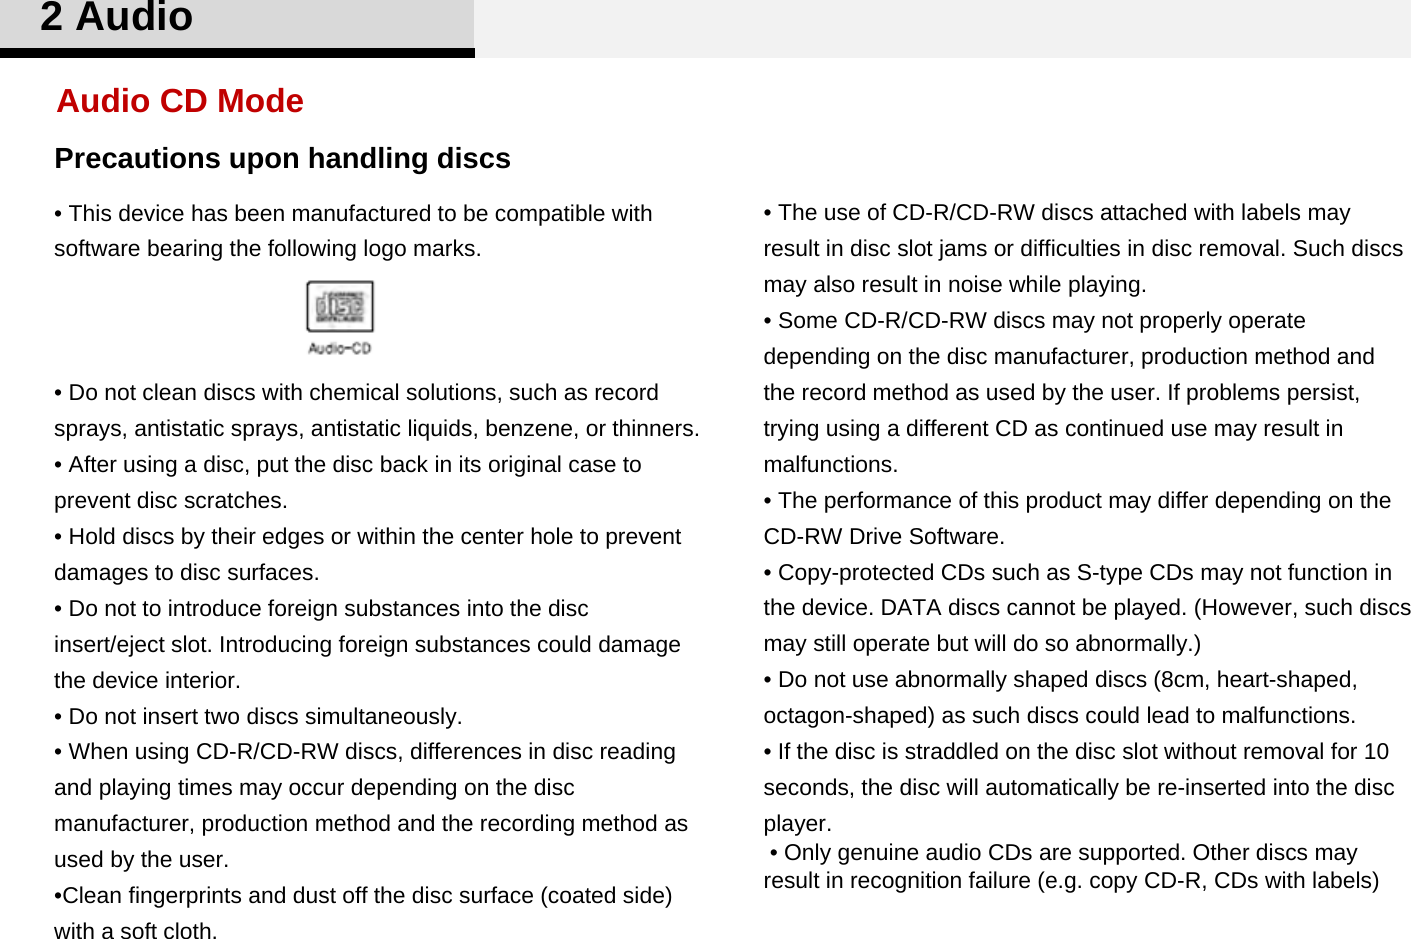 Precautions upon handling discs• This device has been manufactured to be compatible with software bearing the following logo marks. • Do not clean discs with chemical solutions, such as record sprays, antistatic sprays, antistatic liquids, benzene, or thinners.• After using a disc, put the disc back in its original case to prevent disc scratches.• Hold discs by their edges or within the center hole to prevent damages to disc surfaces. • Do not to introduce foreign substances into the disc insert/eject slot. Introducing foreign substances could damage the device interior.•Do not insert two discs simultaneously.• When using CD-R/CD-RW discs, differences in disc reading and playing times may occur depending on the disc manufacturer, production method and the recording method as used by the user. •Clean fingerprints and dust off the disc surface (coated side) with a soft cloth.• The use of CD-R/CD-RW discs attached with labels may result in disc slot jams or difficulties in disc removal. Such discs may also result in noise while playing. • Some CD-R/CD-RW discs may not properly operate depending on the disc manufacturer, production method and the record method as used by the user. If problems persist, trying using a different CD as continued use may result in malfunctions. • The performance of this product may differ depending on the CD-RW Drive Software. • Copy-protected CDs such as S-type CDs may not function in the device. DATA discs cannot be played. (However, such discs may still operate but will do so abnormally.)• Do not use abnormally shaped discs (8cm, heart-shaped, octagon-shaped) as such discs could lead to malfunctions.• If the disc is straddled on the disc slot without removal for 10 seconds, the disc will automatically be re-inserted into the disc player. • Only genuine audio CDs are supported. Other discs may result in recognition failure (e.g. copy CD-R, CDs with labels)Audio CD Mode2 Audio